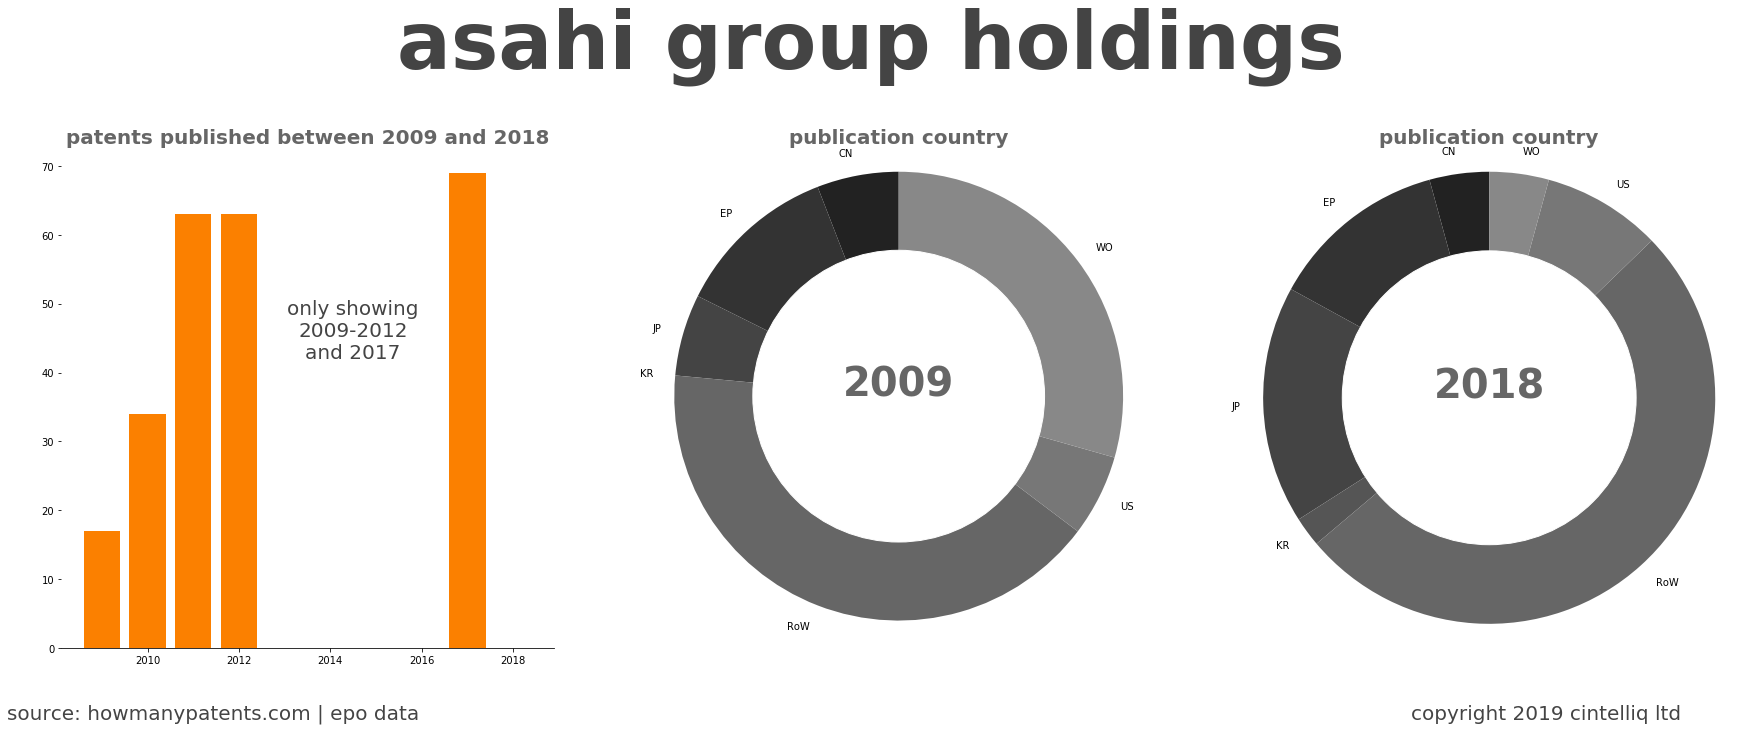 summary of patents for Asahi Group Holdings